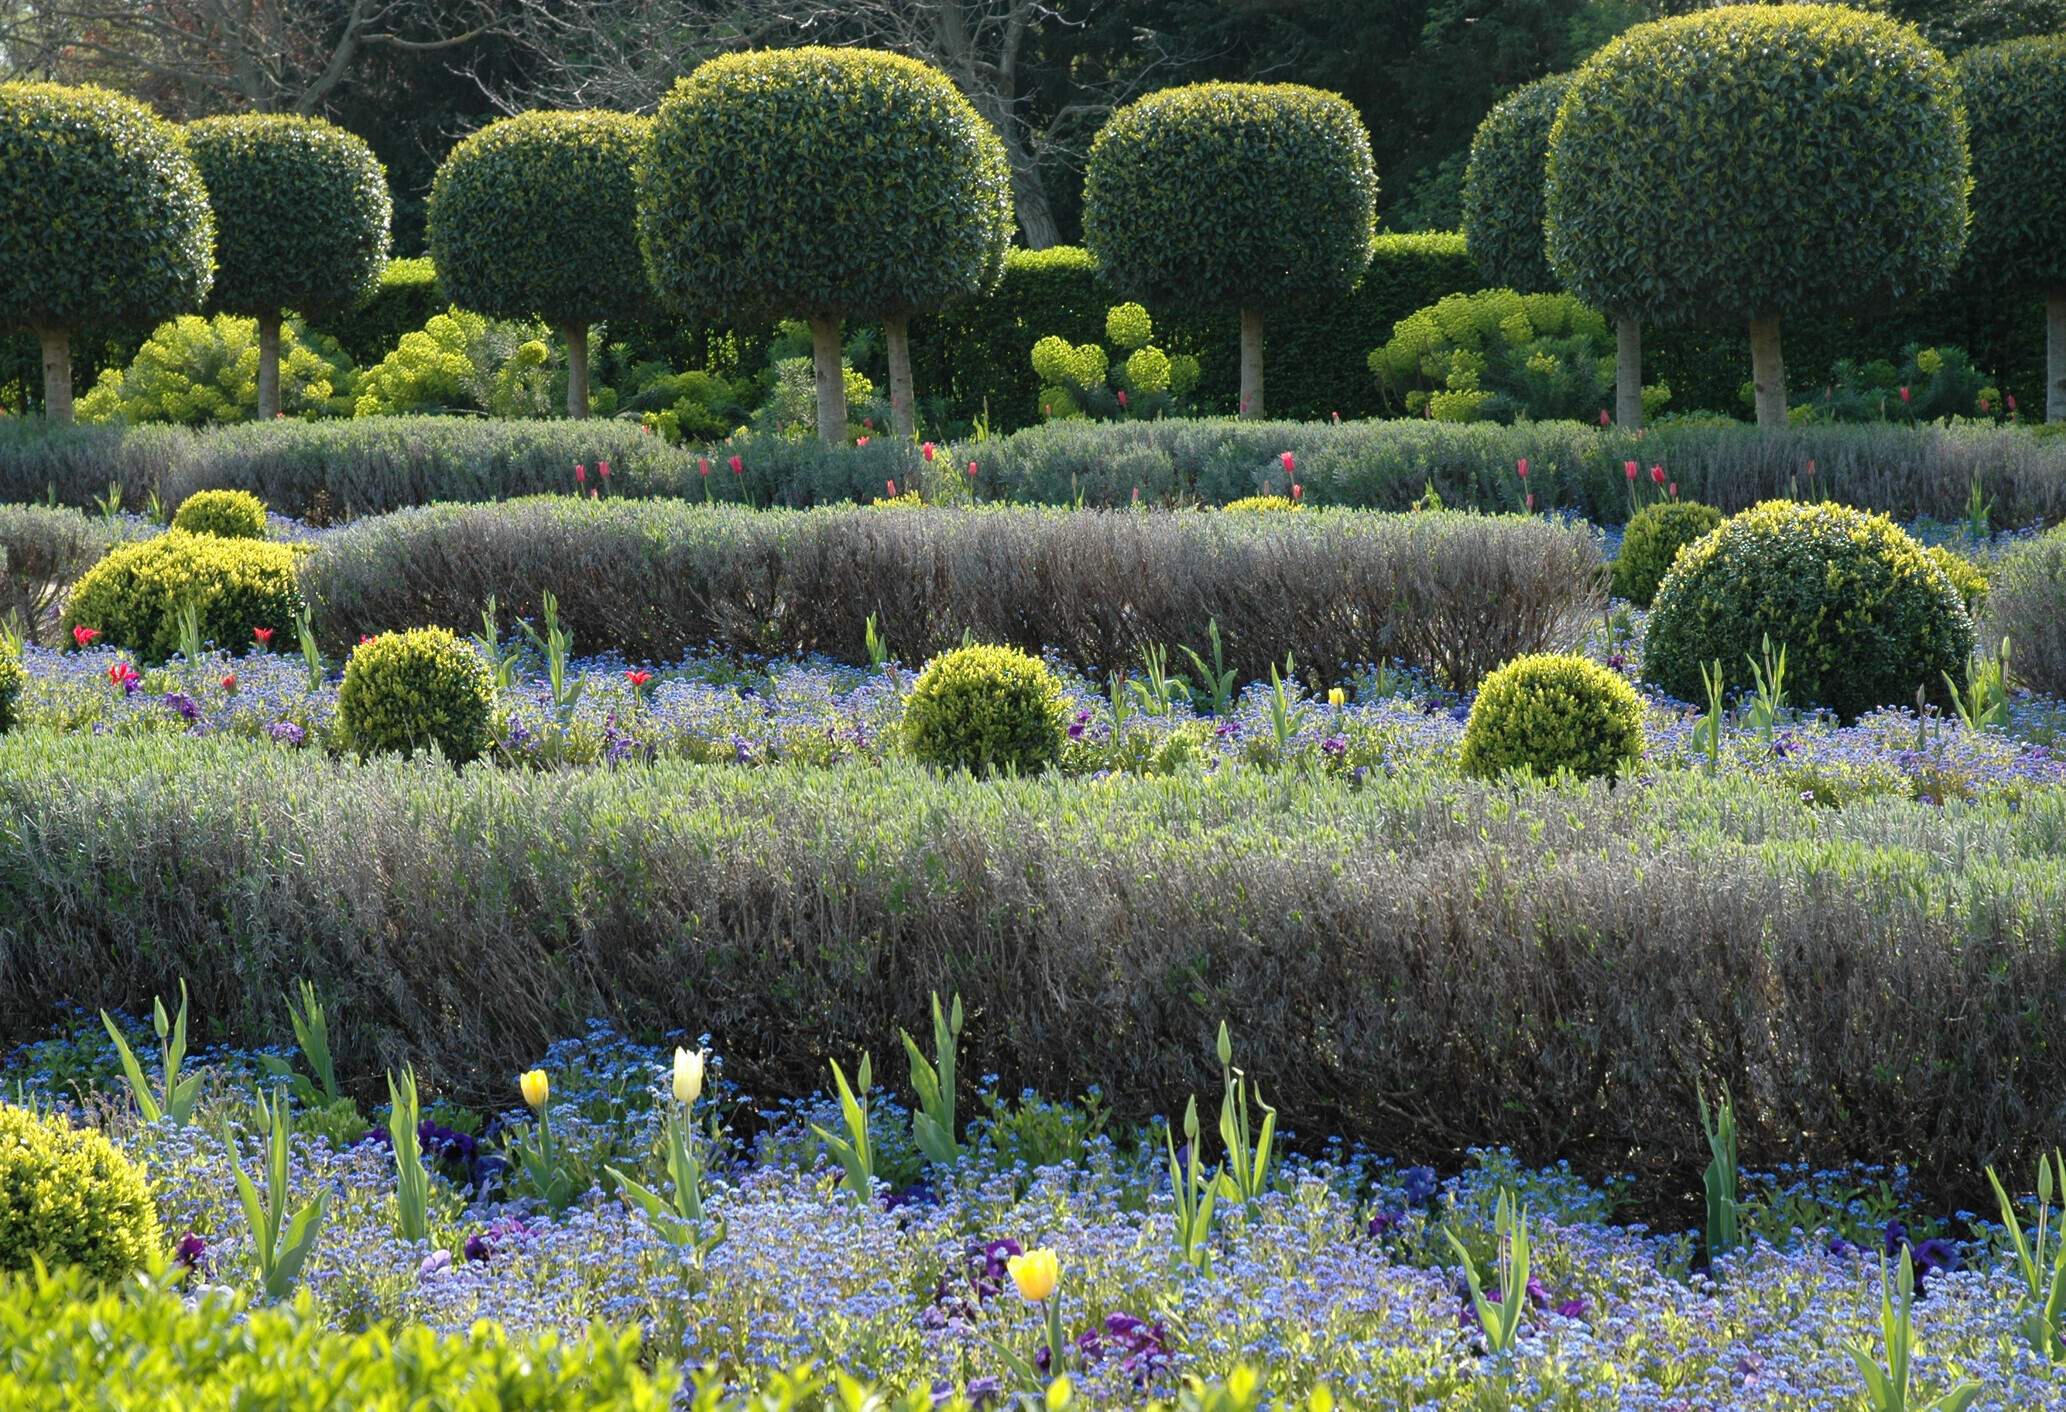 A garden filled with rows of bushes, flowers, and topiary trees.